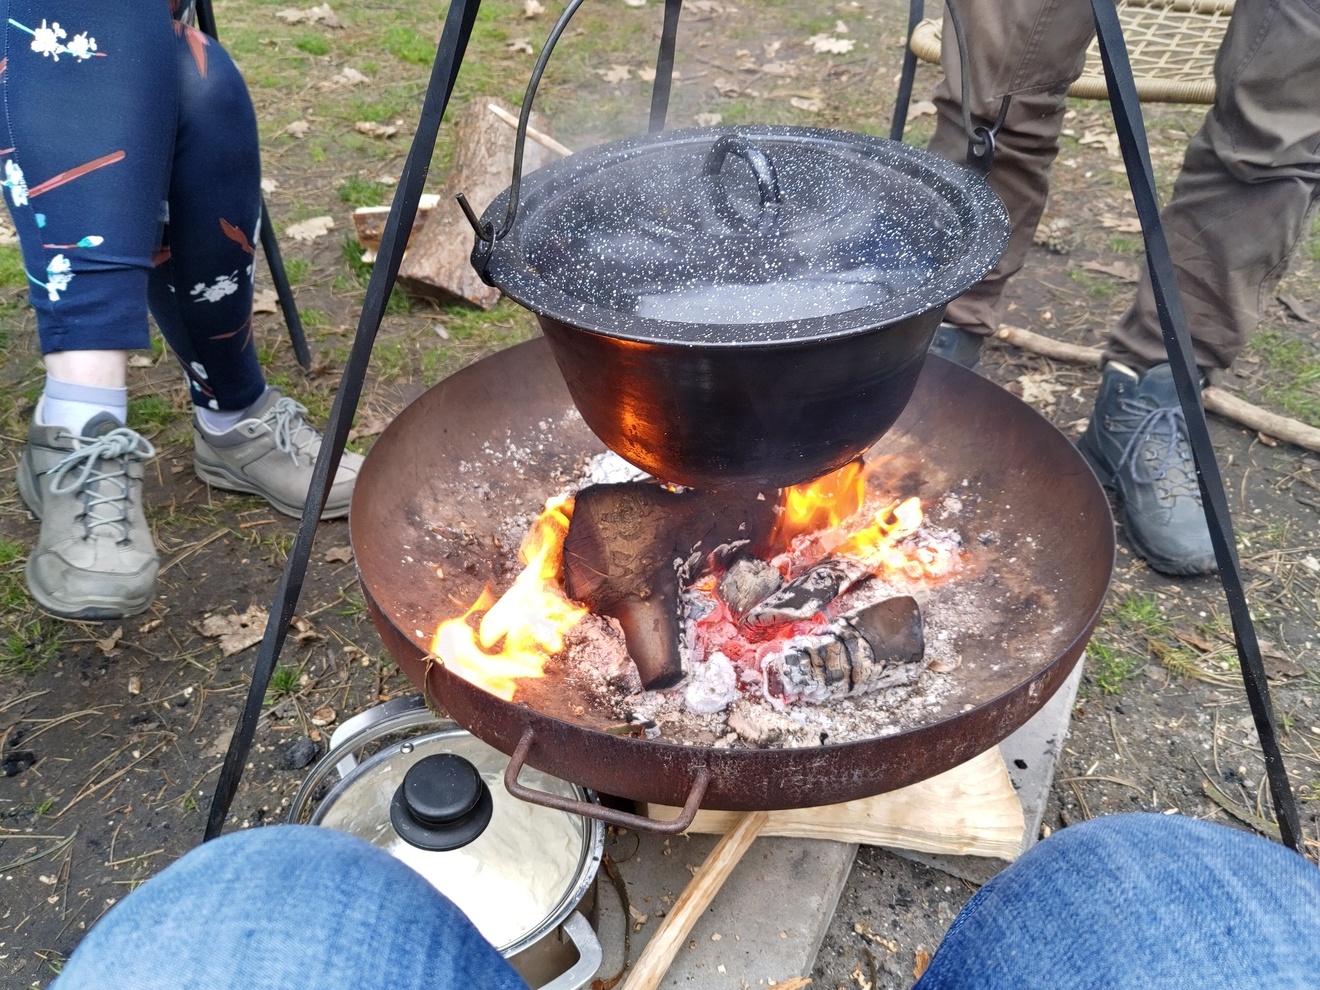 Cooking on actual fire